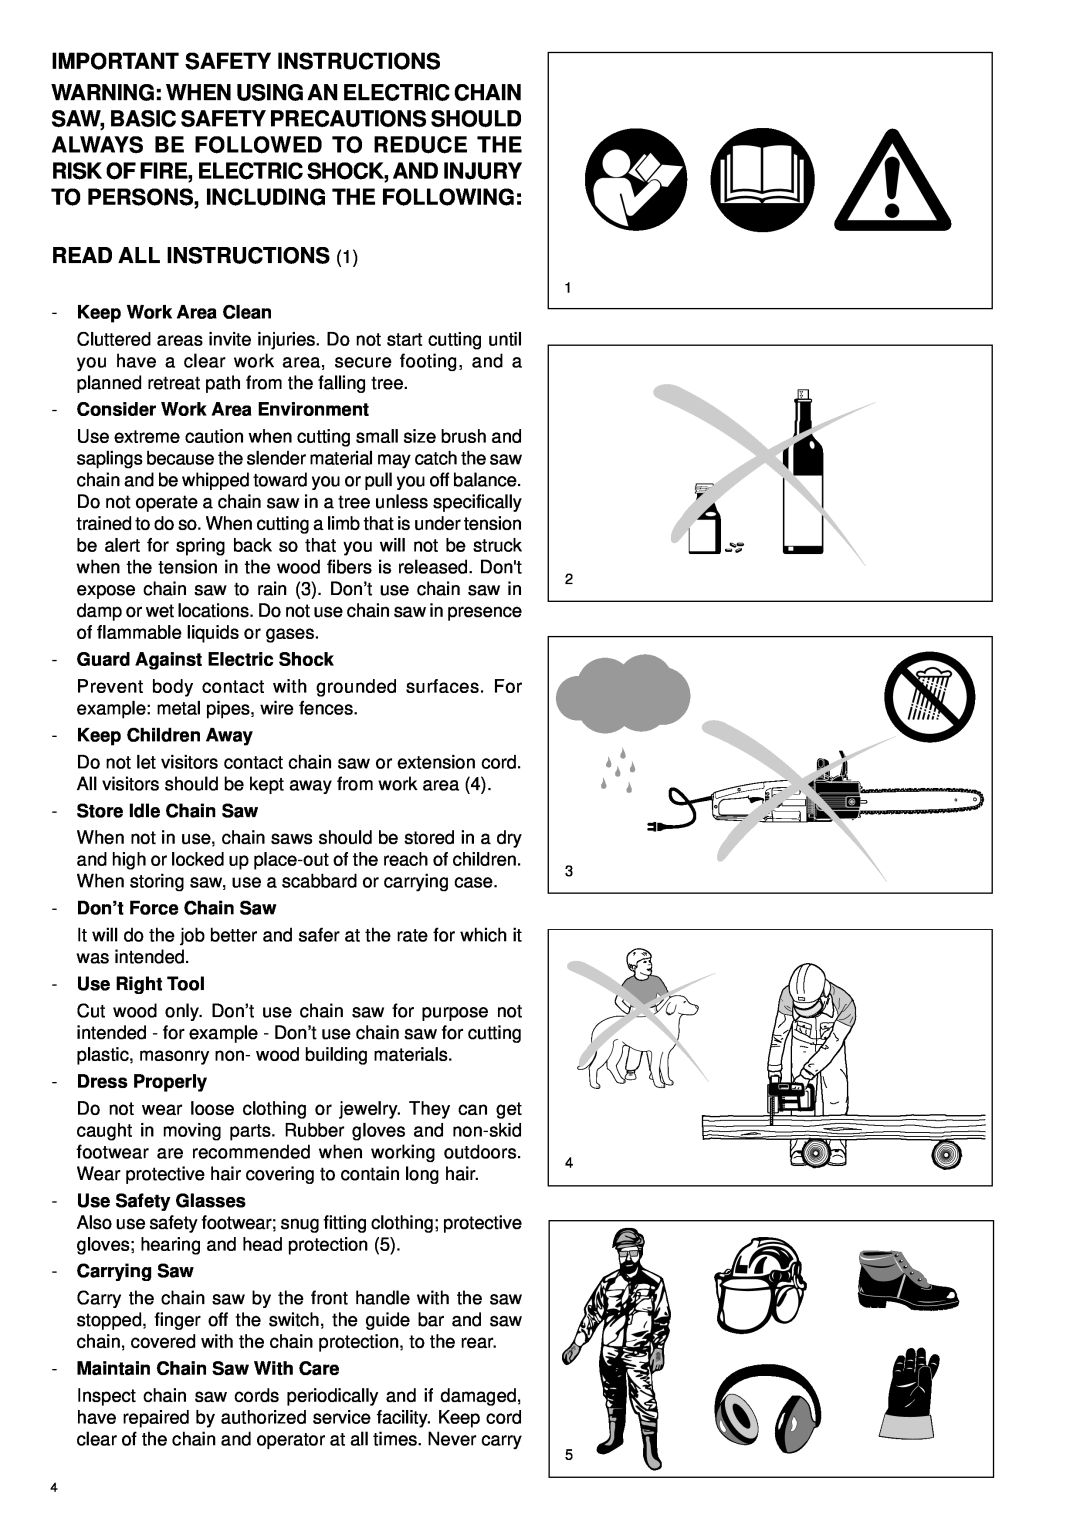 Makita UC 3000, UC 3500, UC 4000 manual Important Safety Instructions, Read All Instructions 